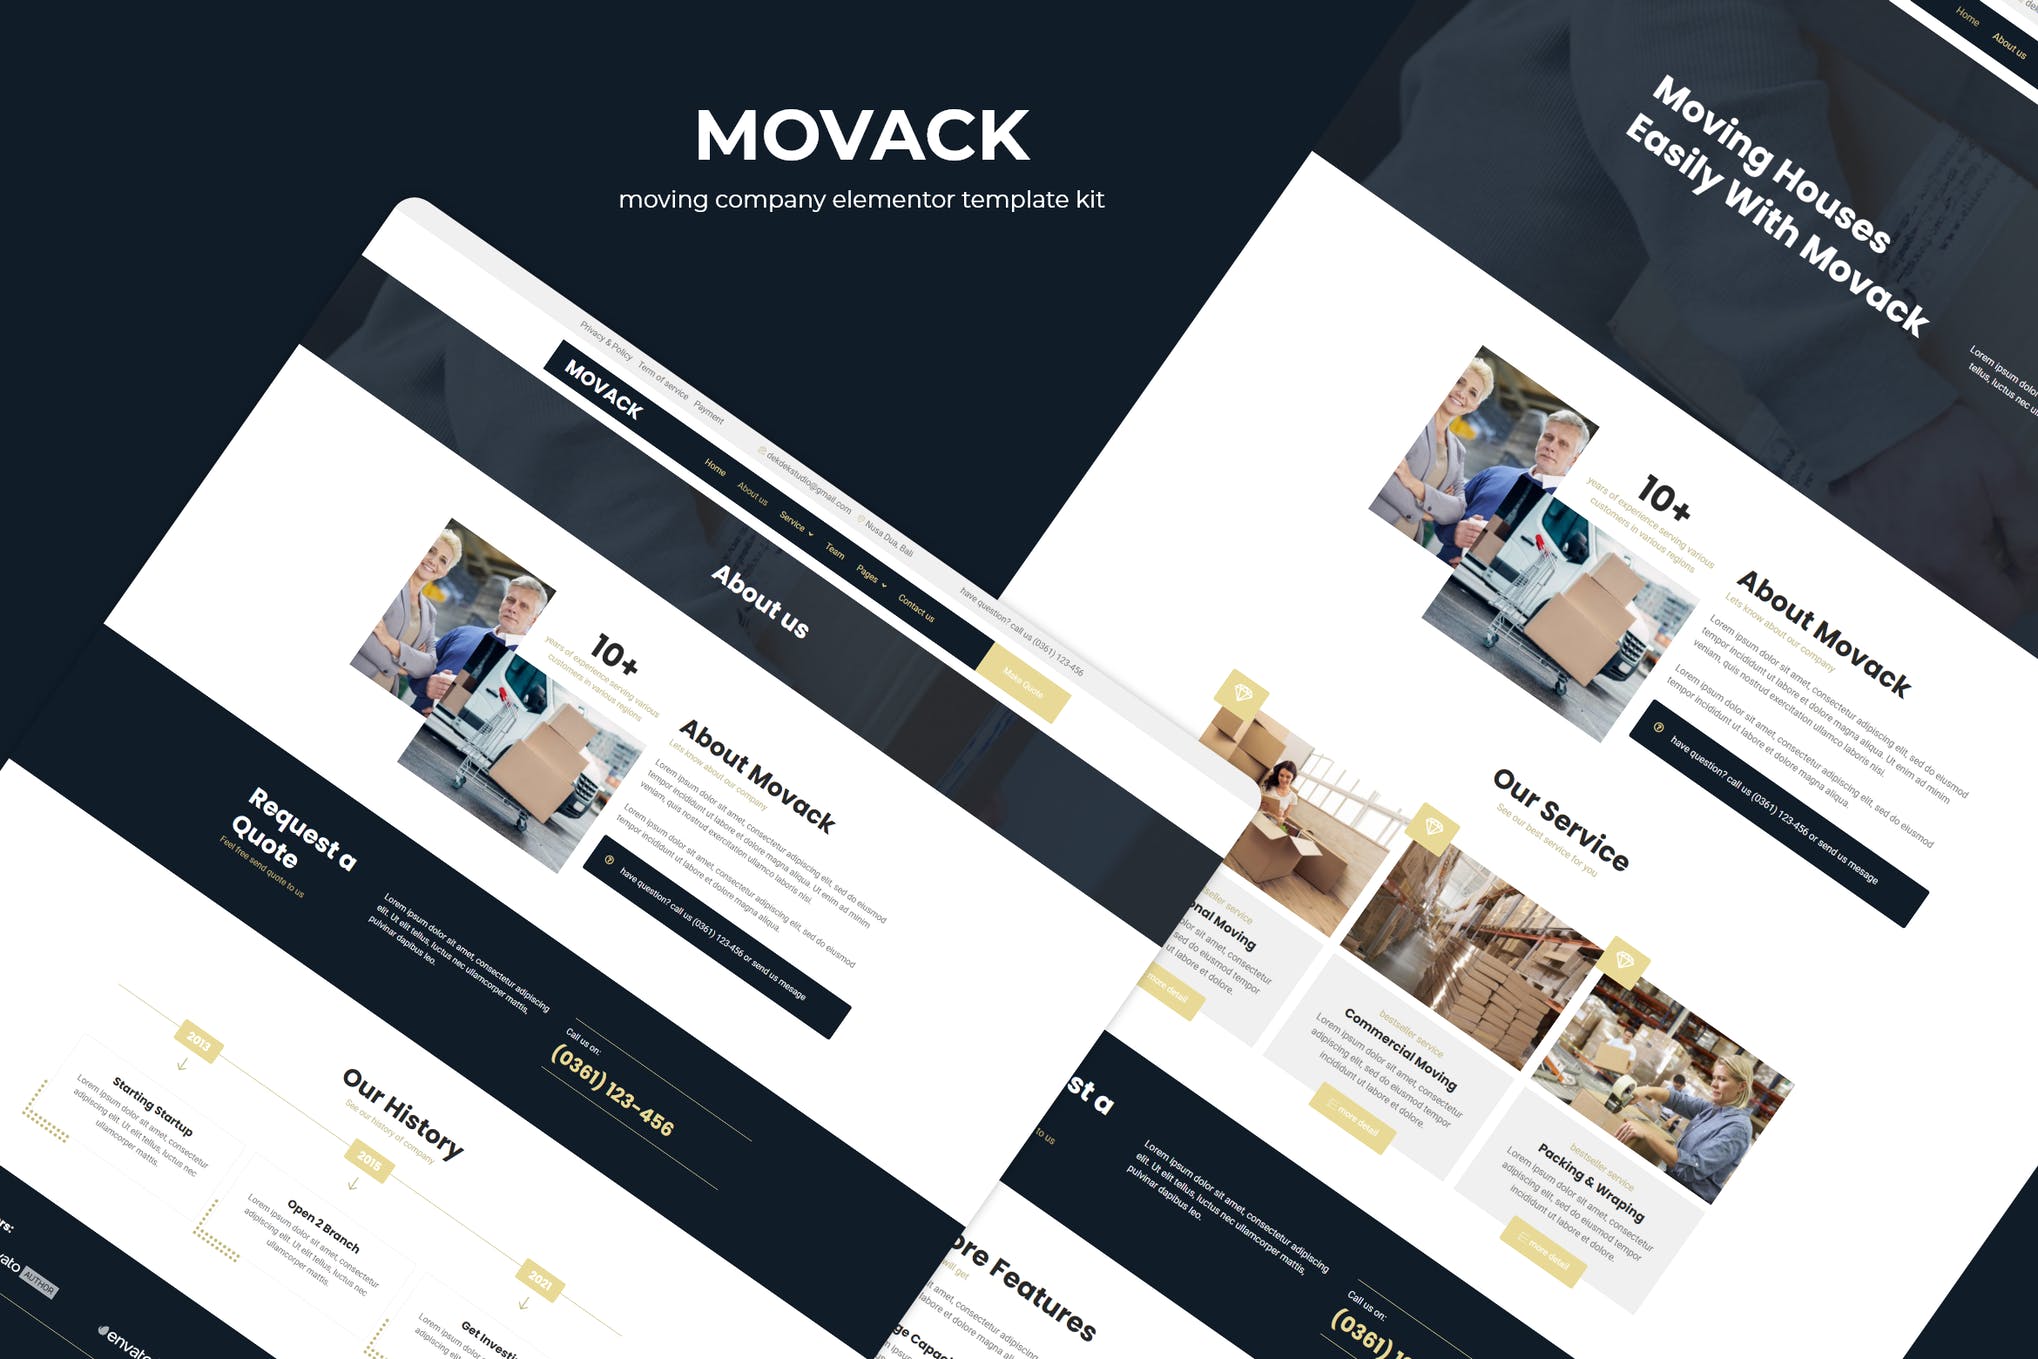 Movack - Moving Company Elementor Template Kit